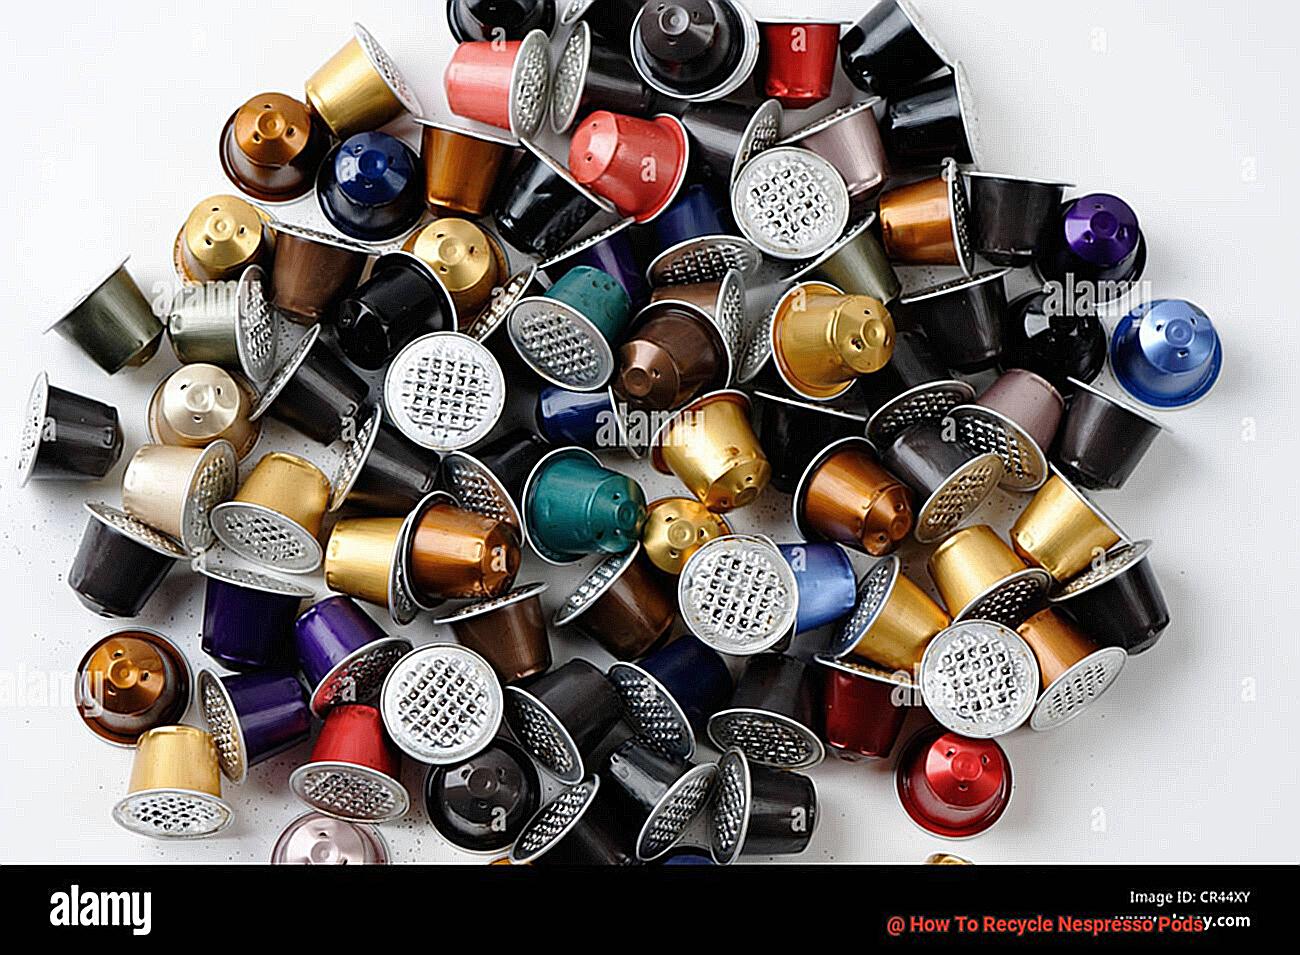 How To Recycle Nespresso Pods-2